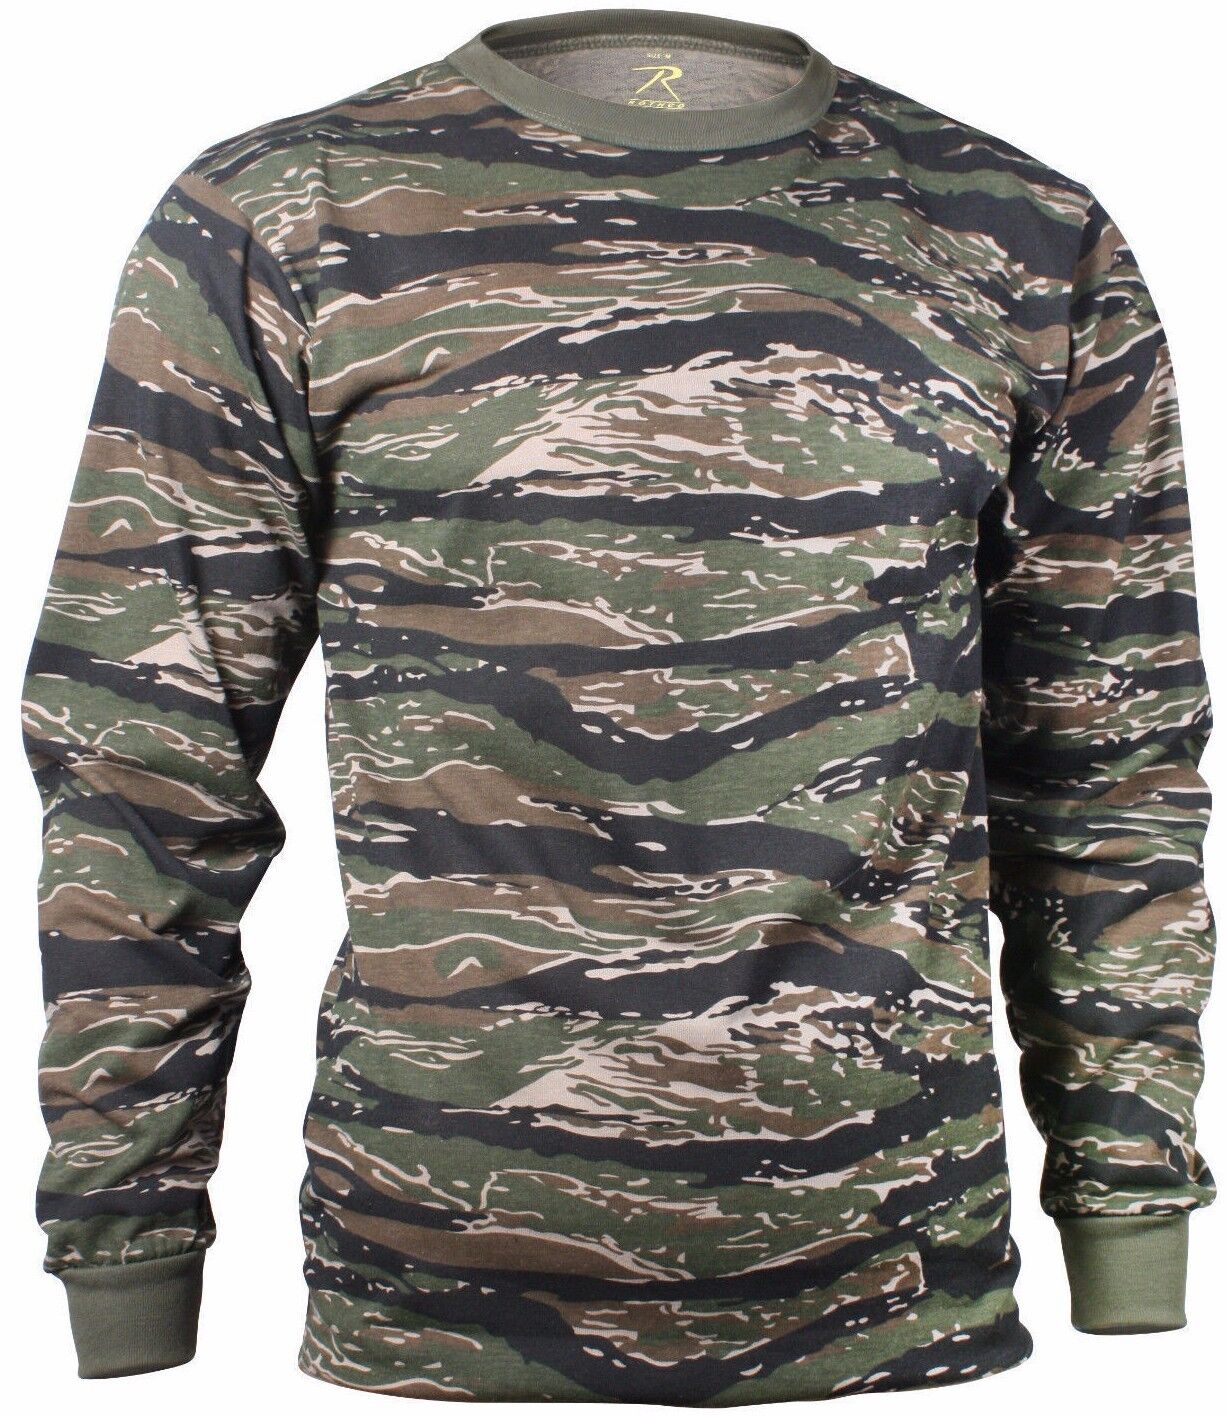 Long Sleeve T-shirt Camouflage Military Tactical (Choose Sizes)